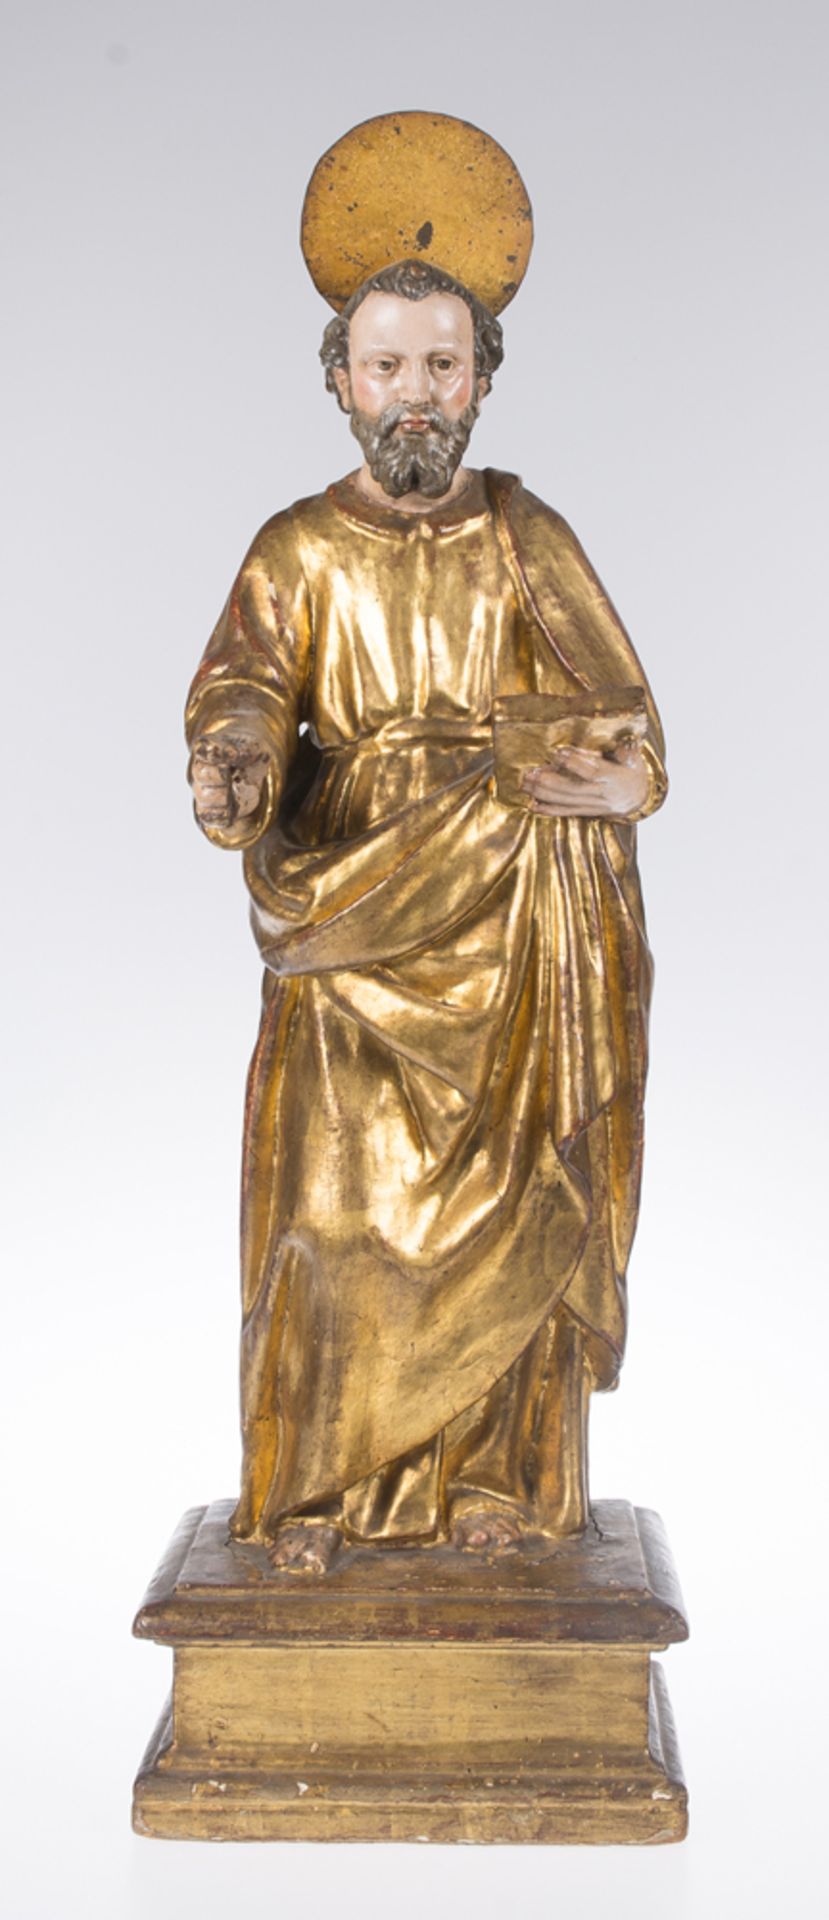 "Saint Peter". Carved, gilded and polychromed wooden. sculpture Andalusian School. 17th century.